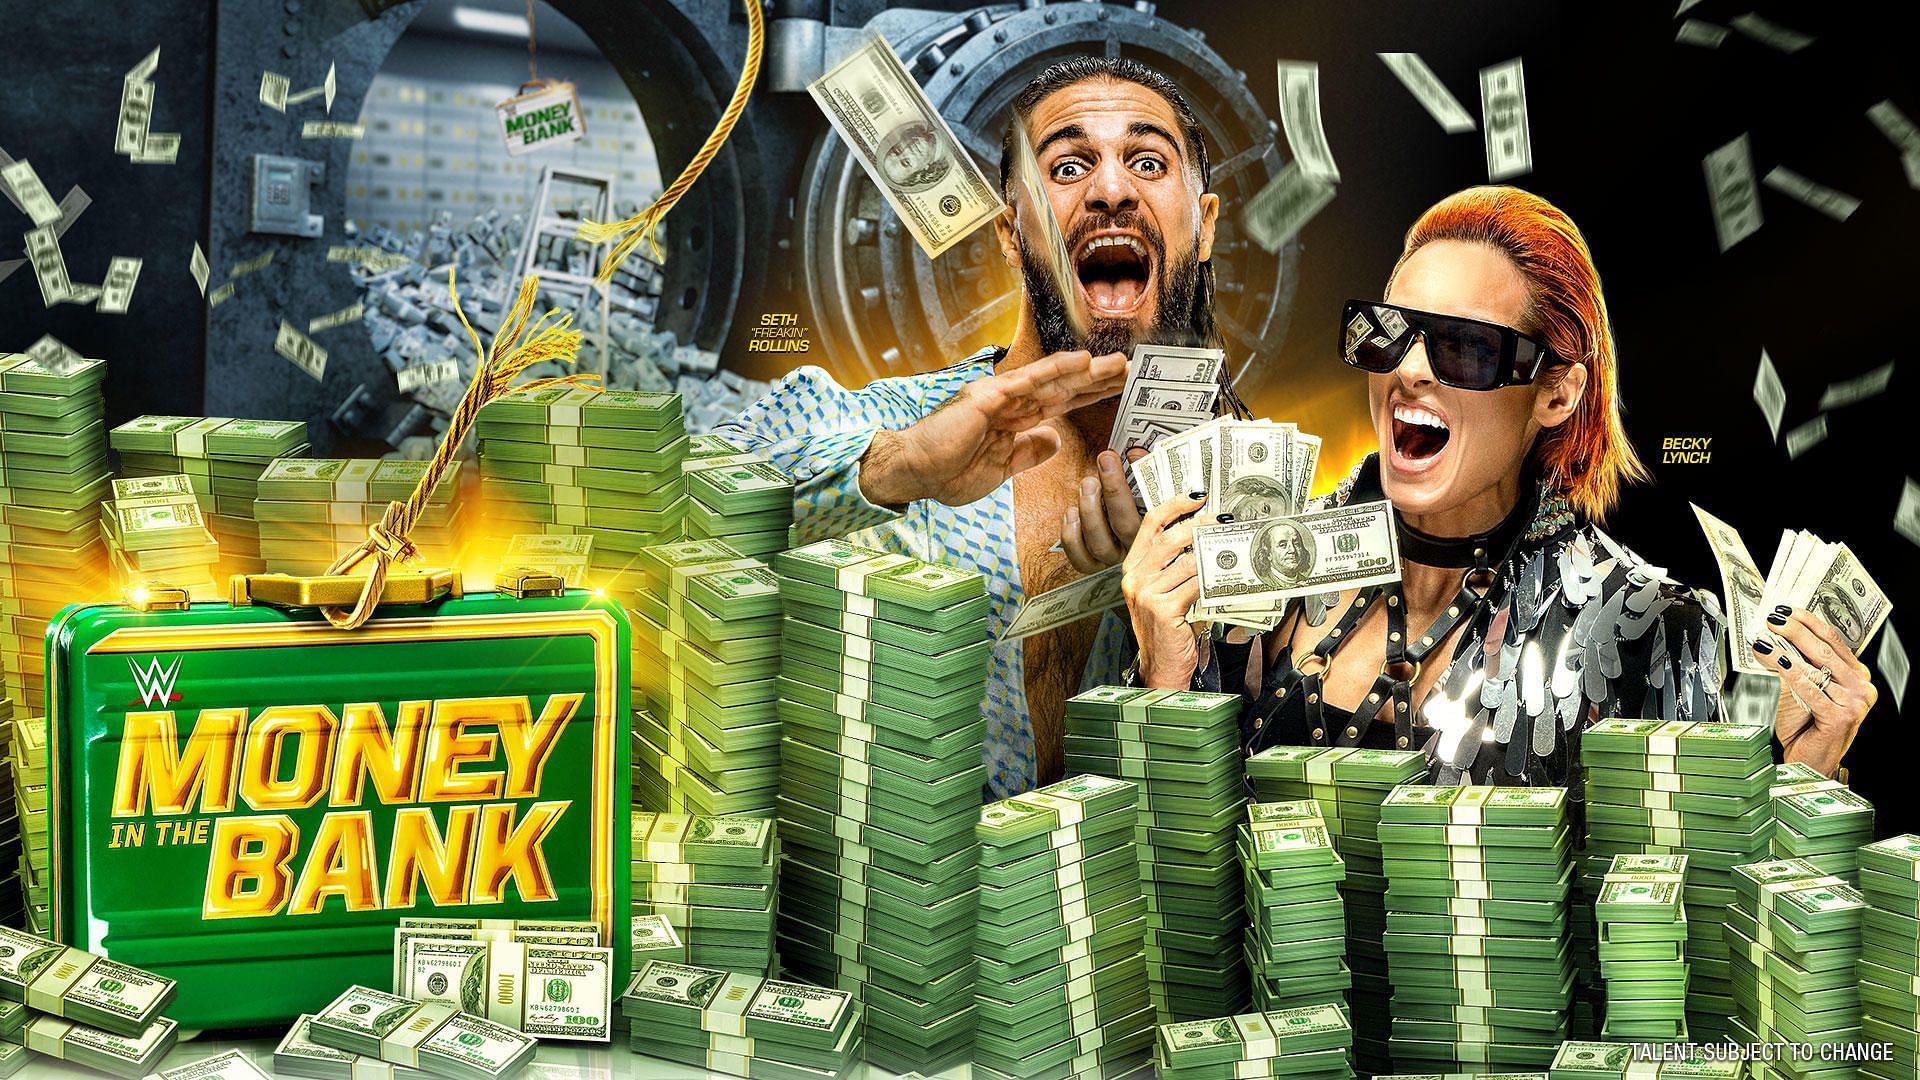 The Money in the Bank official poster